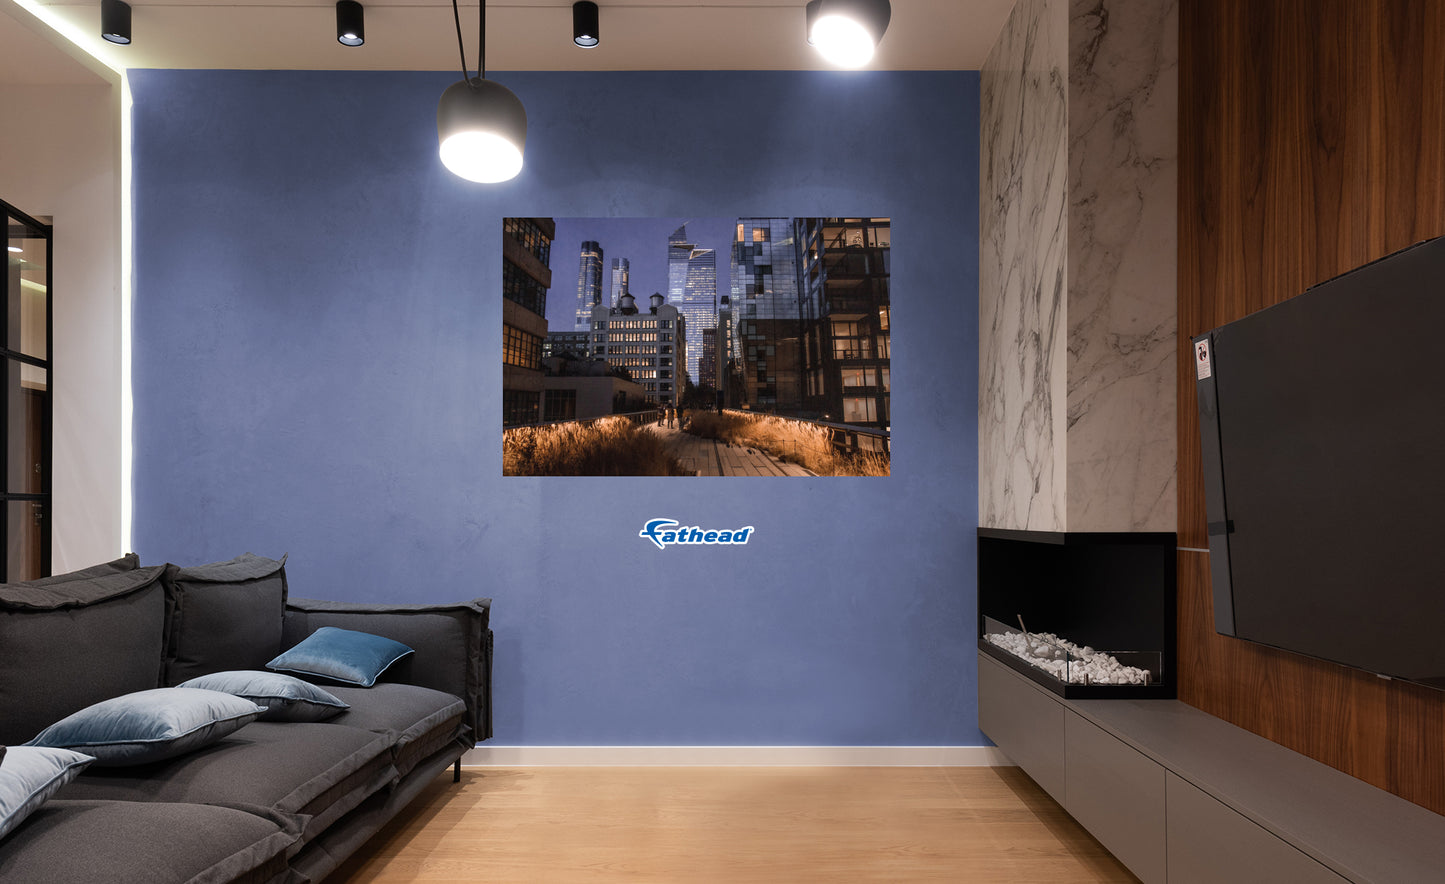 Generic Scenery:  Night Lights Poster        -   Removable     Adhesive Decal